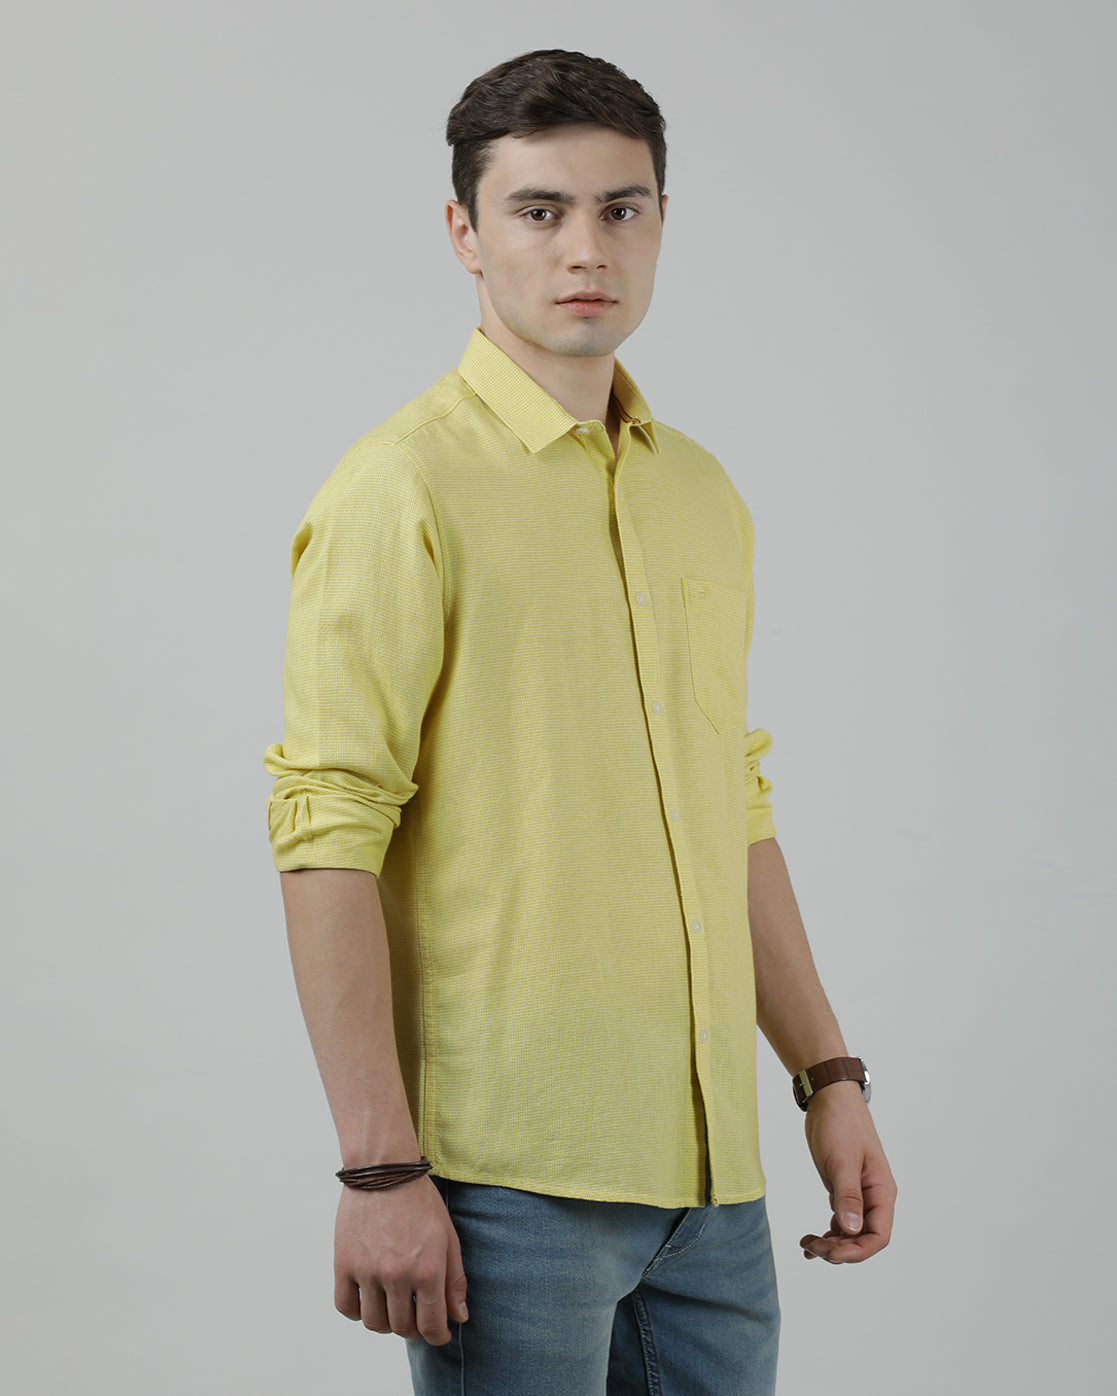 Casual Full Sleeve Slim Fit Solid Shirt Yellow for Men